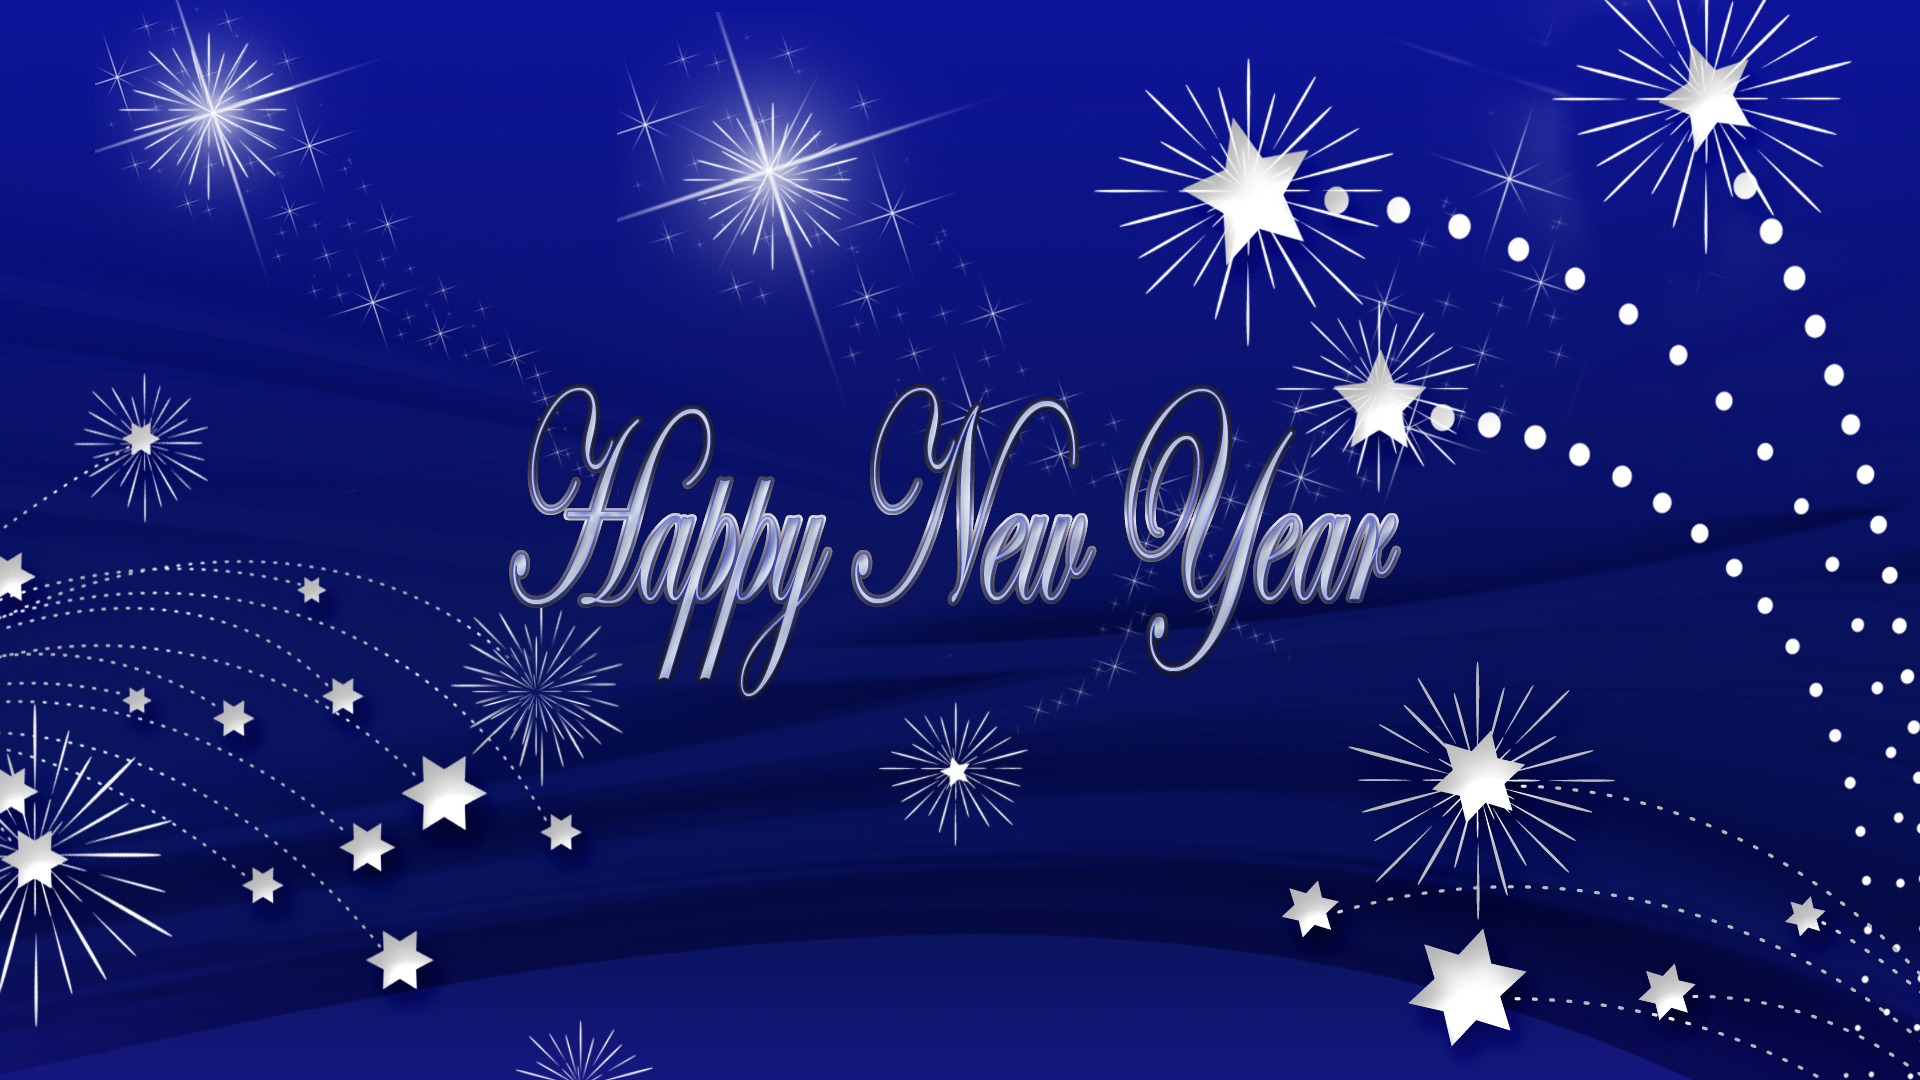 Happy New Year 2016 HD Wallpapers Download